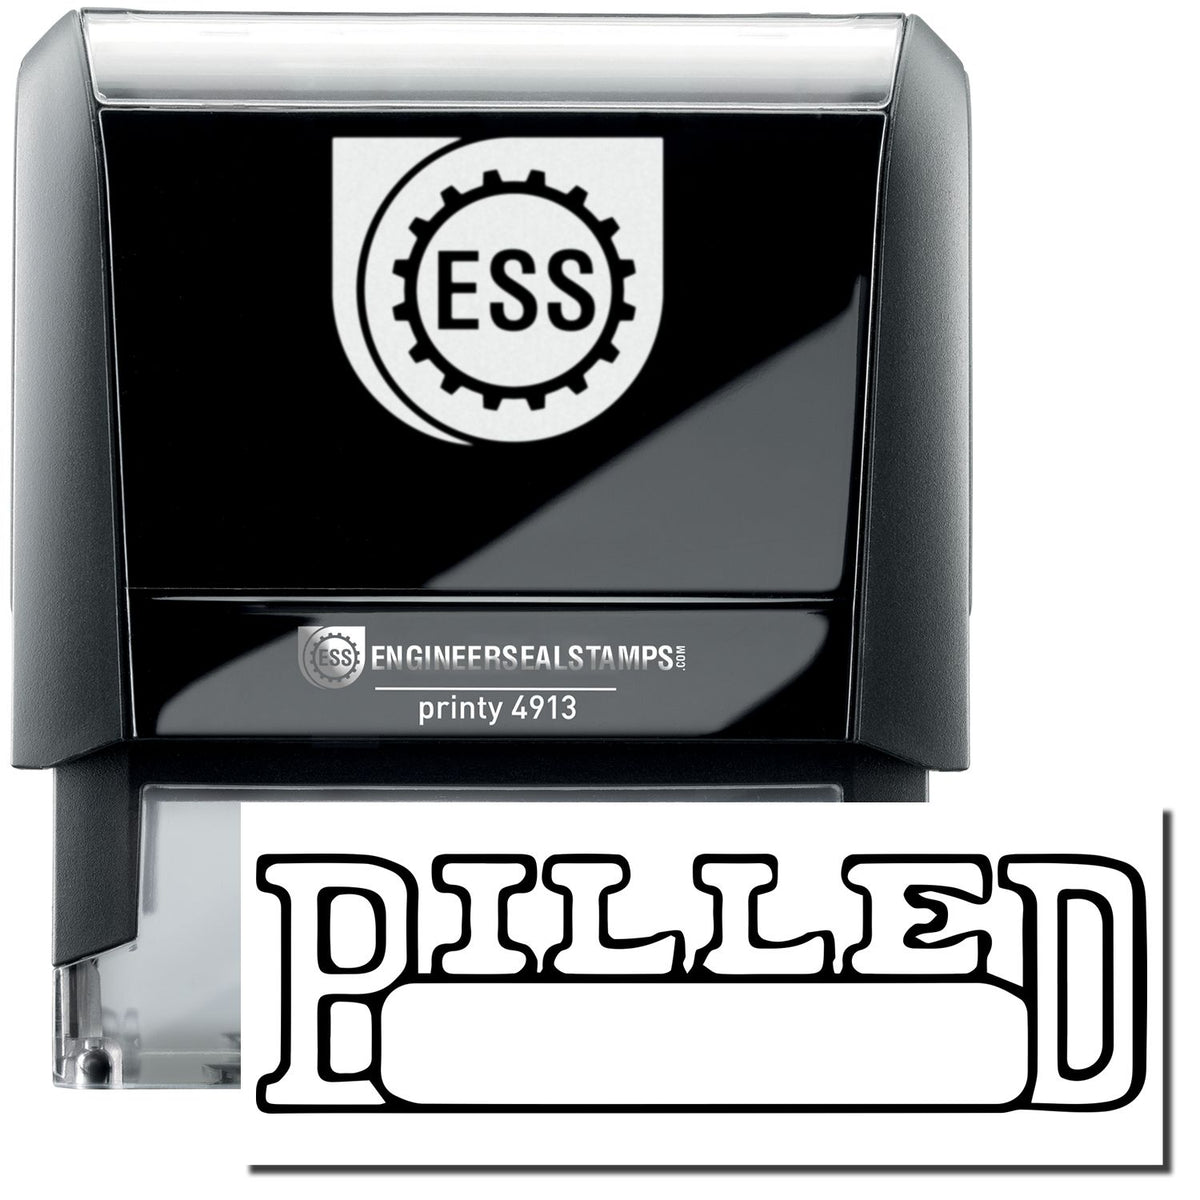 A self-inking stamp with a stamped image showing how the text &quot;BILLED&quot; in a large outline font with a date box is displayed by it after stamping.